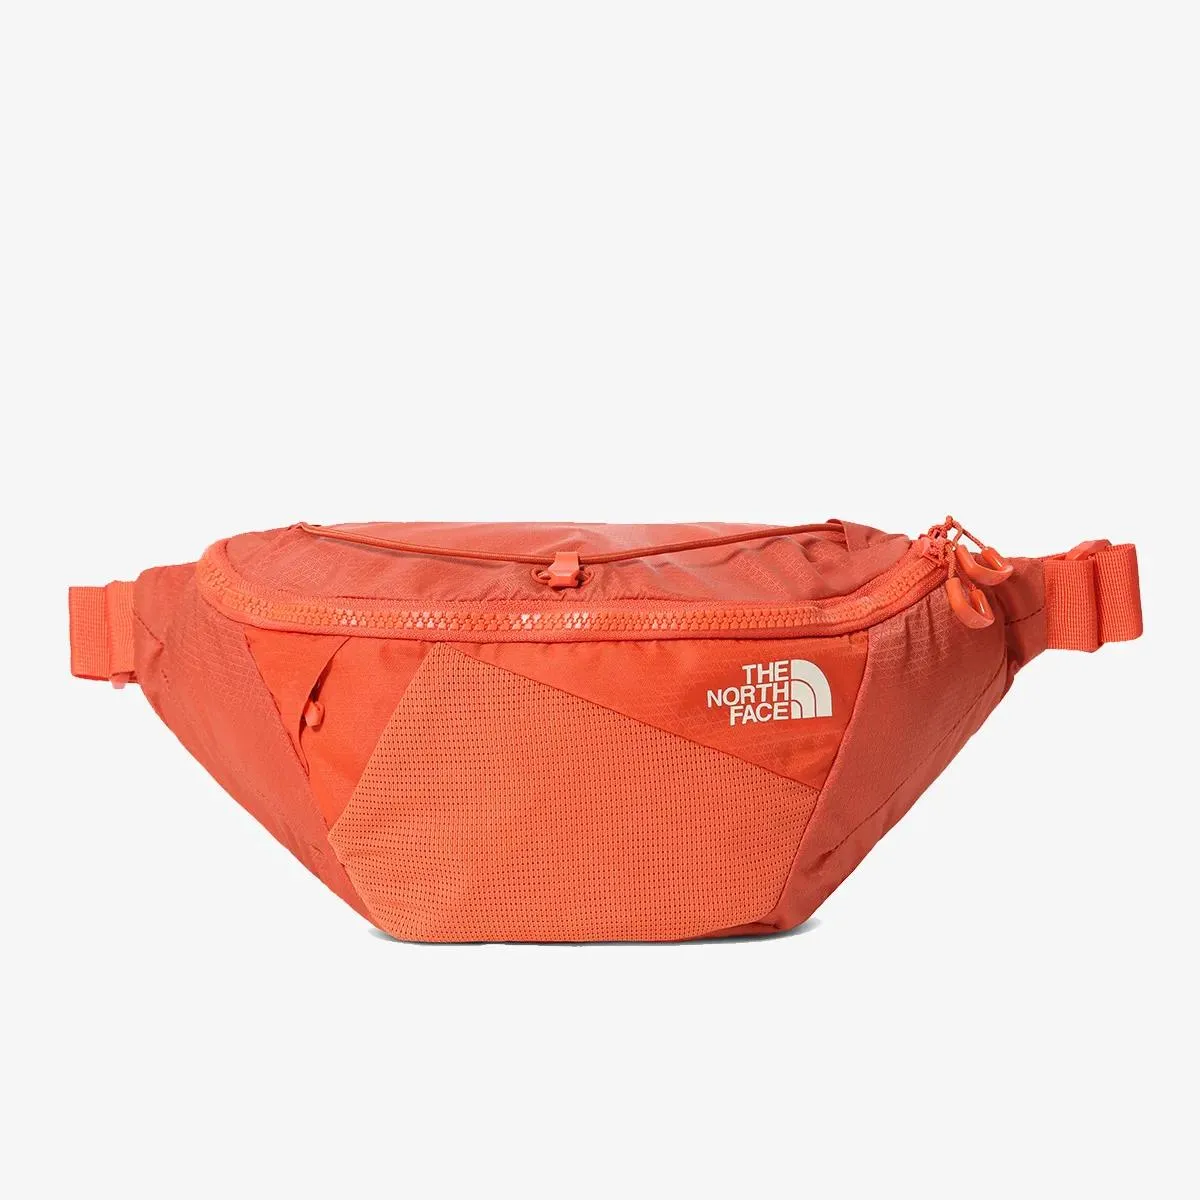 The North Face Torba LUMBNICAL - S 